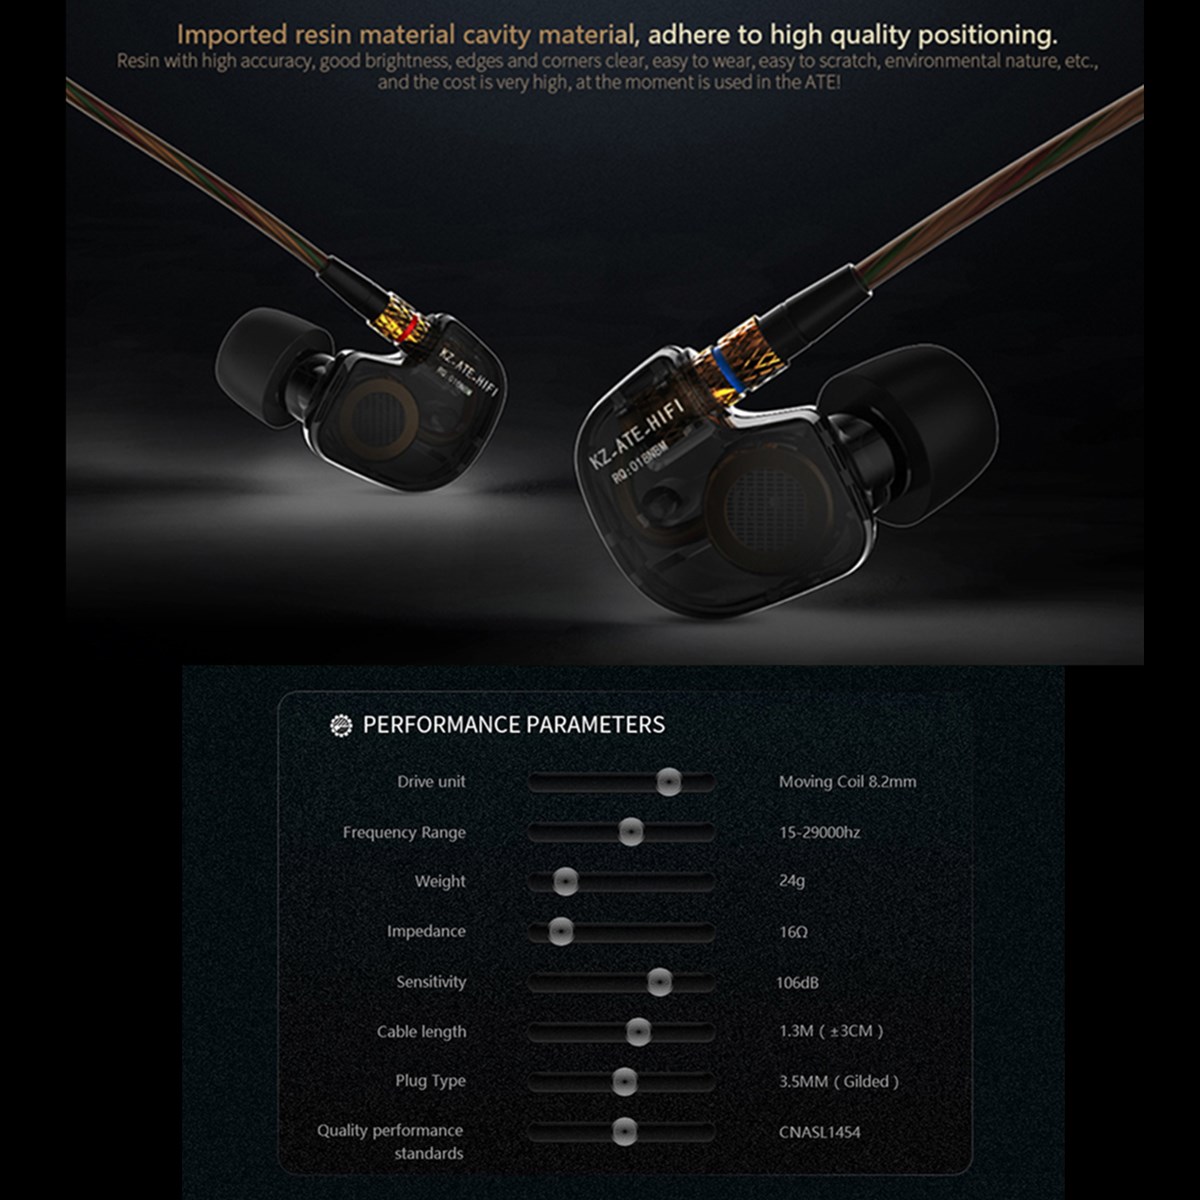 KZ ATE 3.5mm Metal In-ear Wired Earphone HIFI Super Bass Copper Driver Noise Cancelling Sports 34